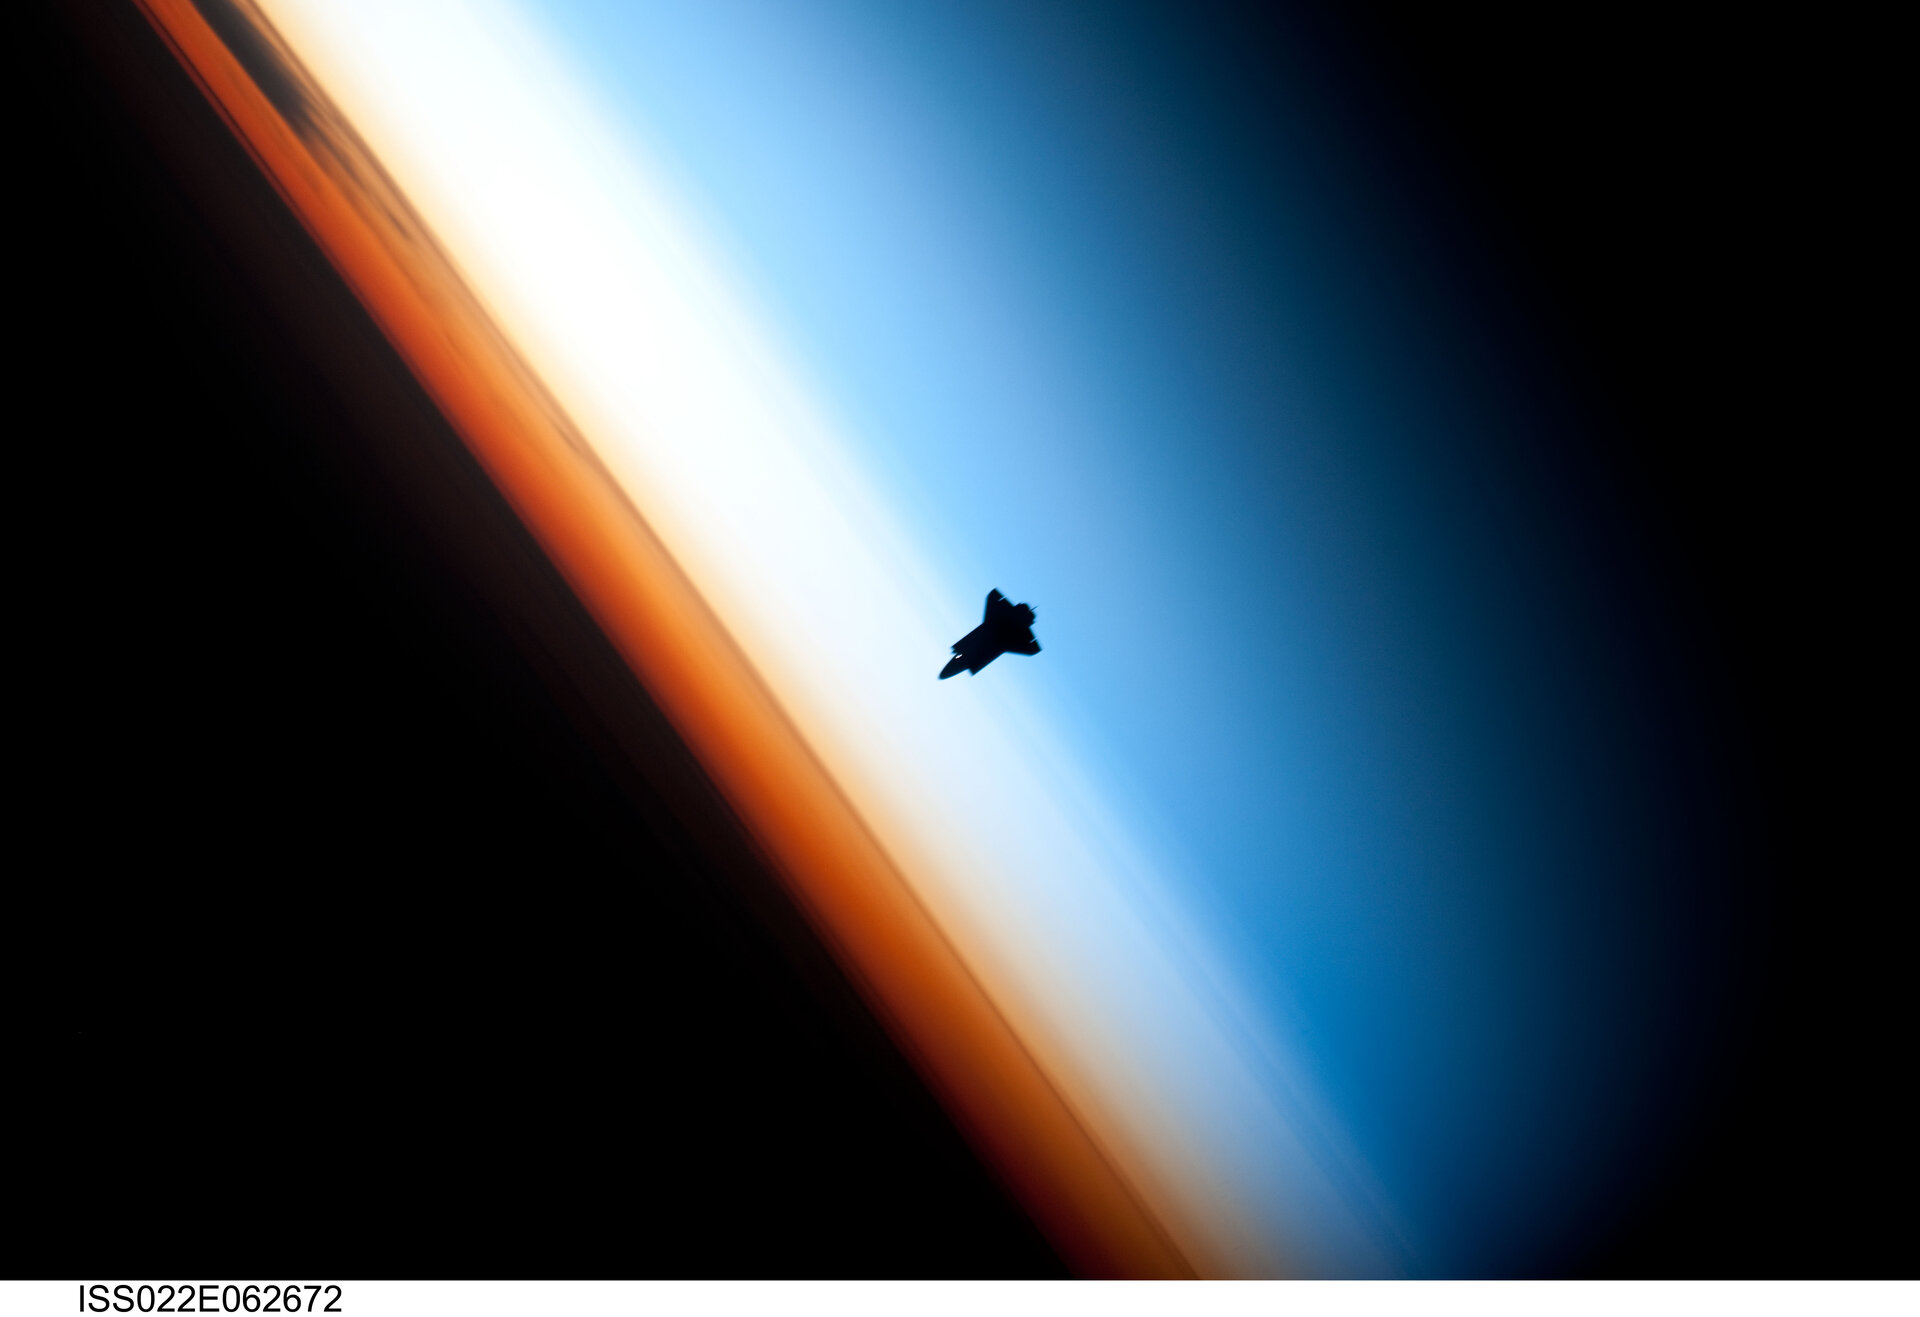 Space Shuttle Endeavour approaches the ISS during STS-130 mission